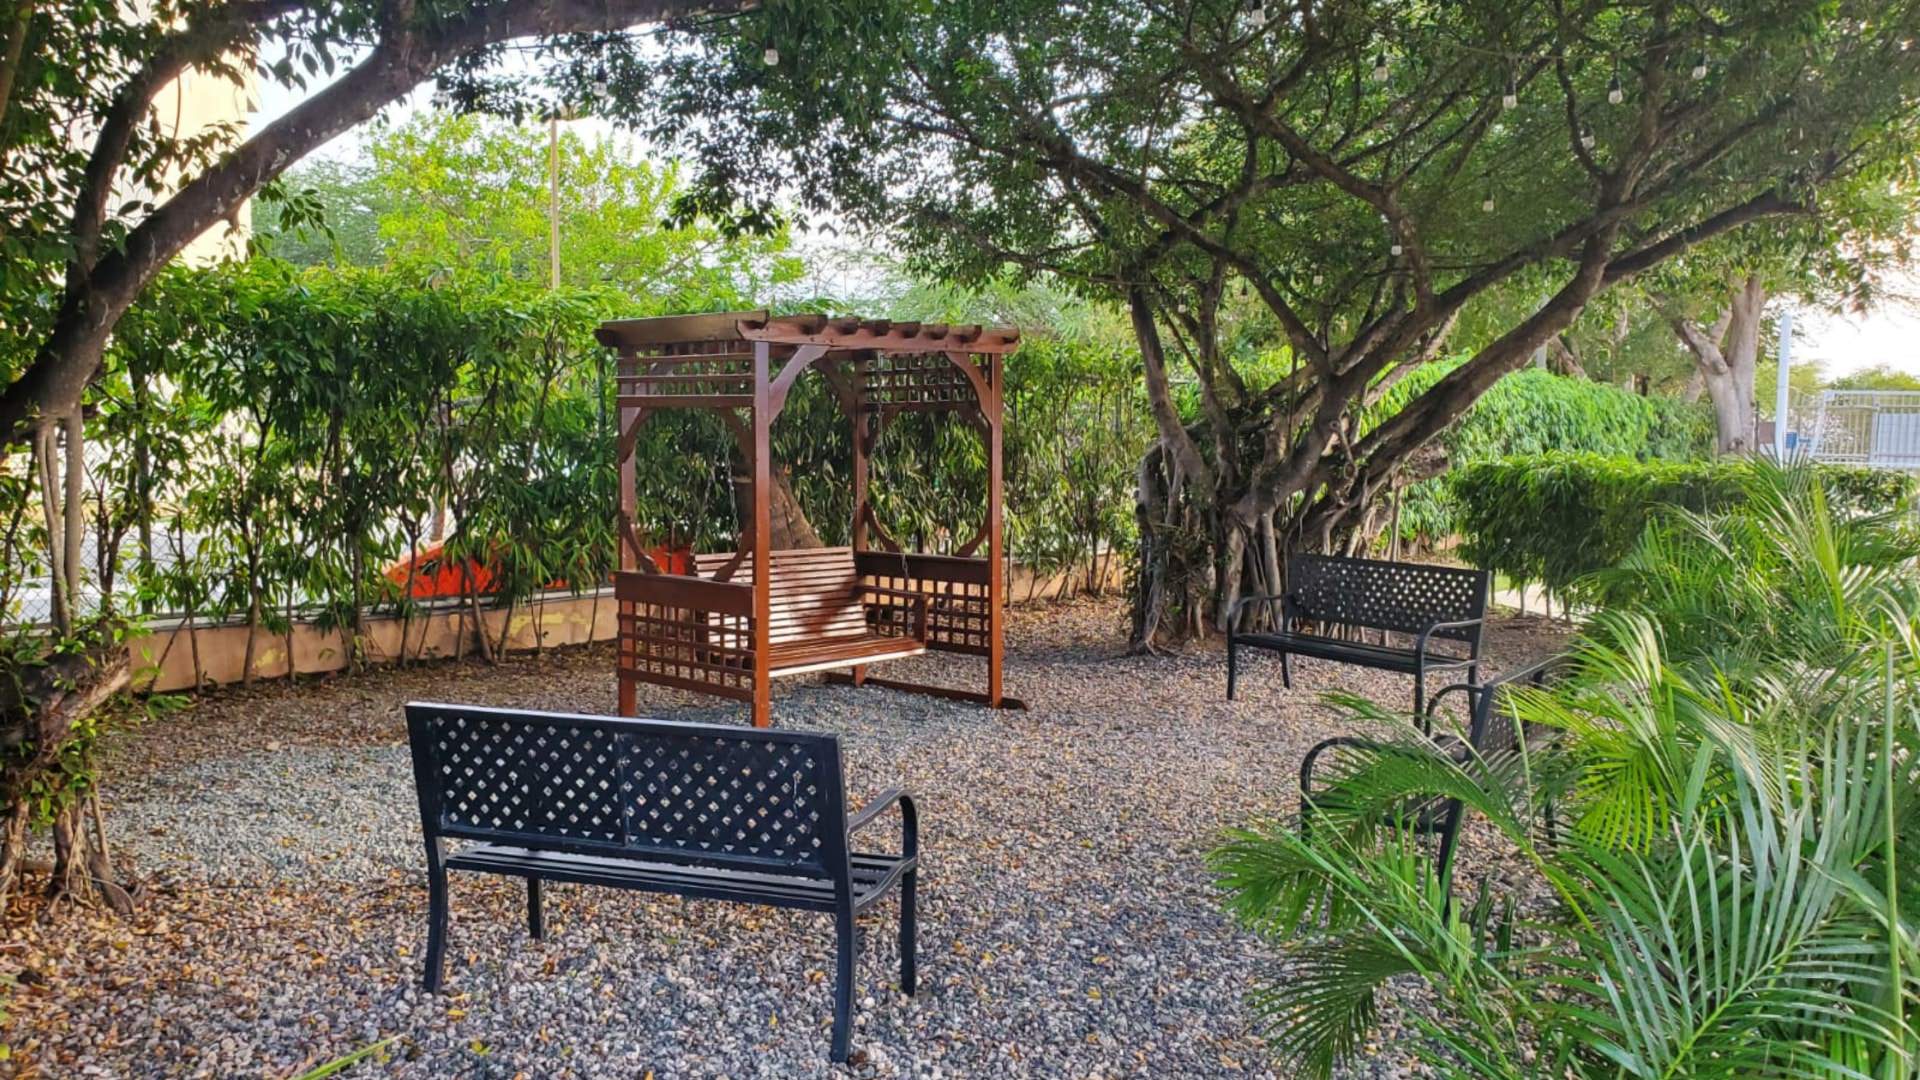 Wooden arbor with a swing and three metal benches in a graveled area surrounded by green trees and shrubs